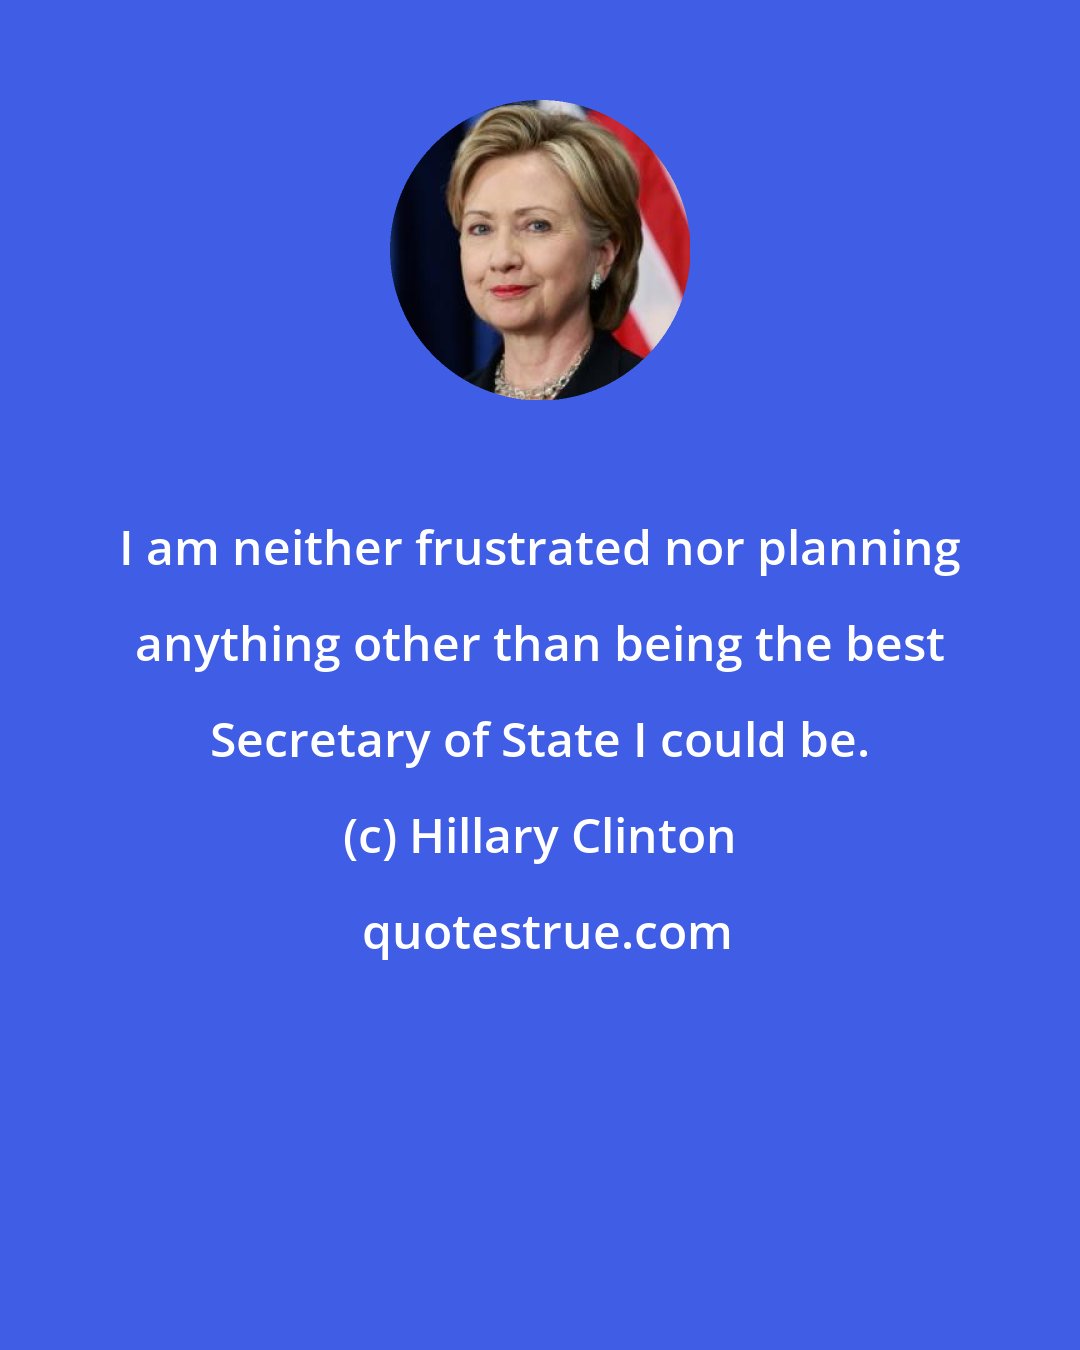 Hillary Clinton: I am neither frustrated nor planning anything other than being the best Secretary of State I could be.